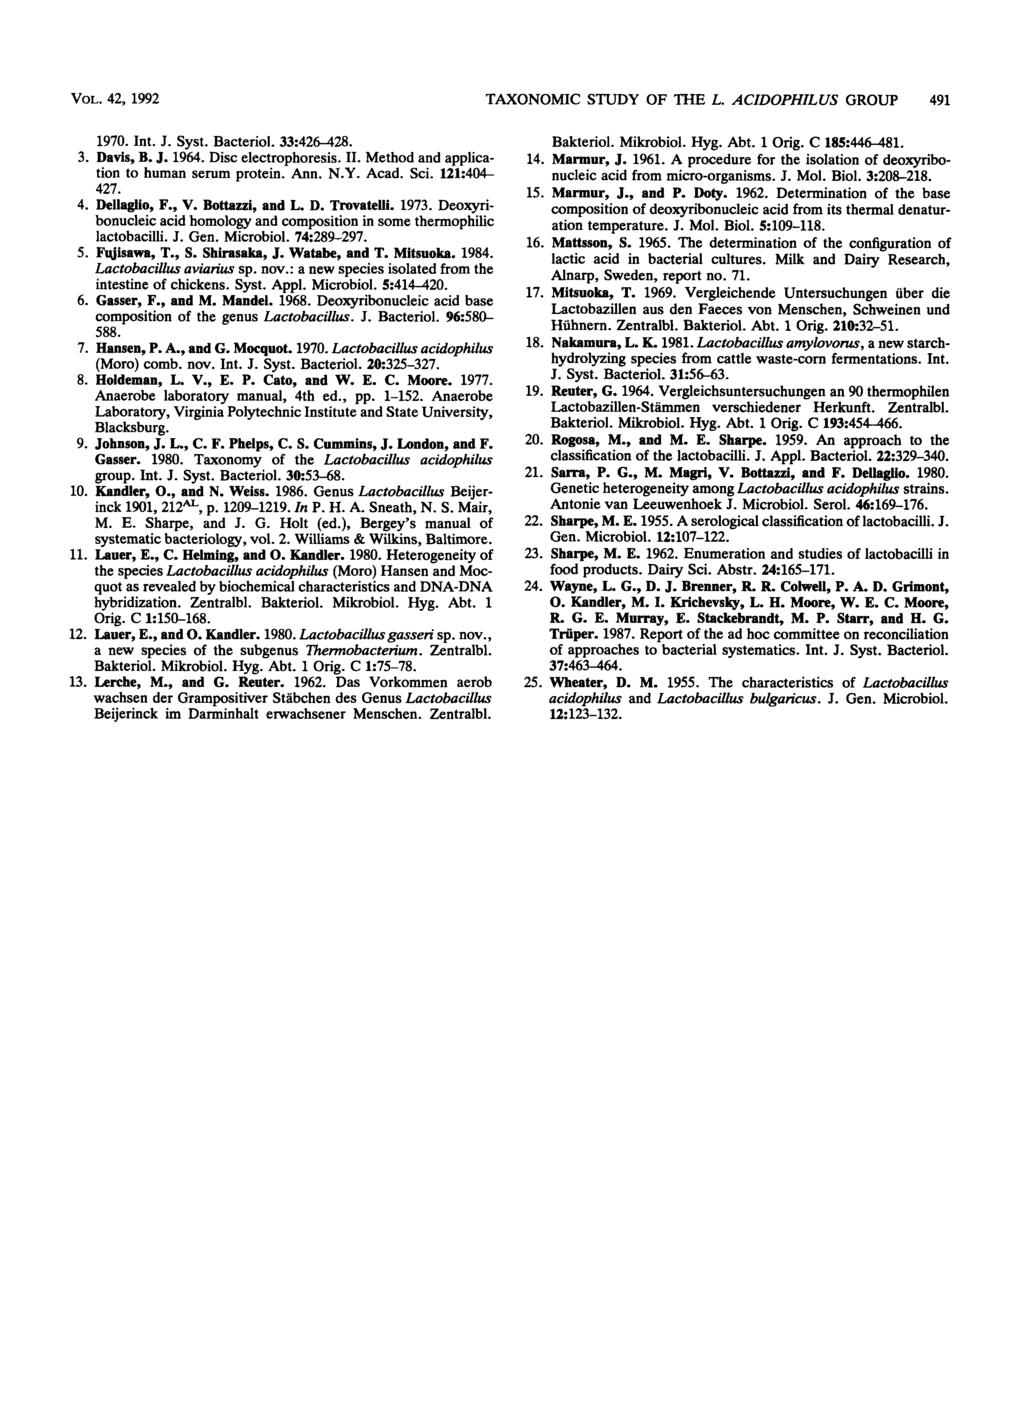 VOL. 42, 1992 TAXONOMIC STUDY OF THE L. ACIDOPHILUS GROUP 491 197. Int. J. Syst. Bacteriol. 33:426428. 3. Davis, B. J. 1964. Disc electrophoresis. 11. Method and application to human serum protein.